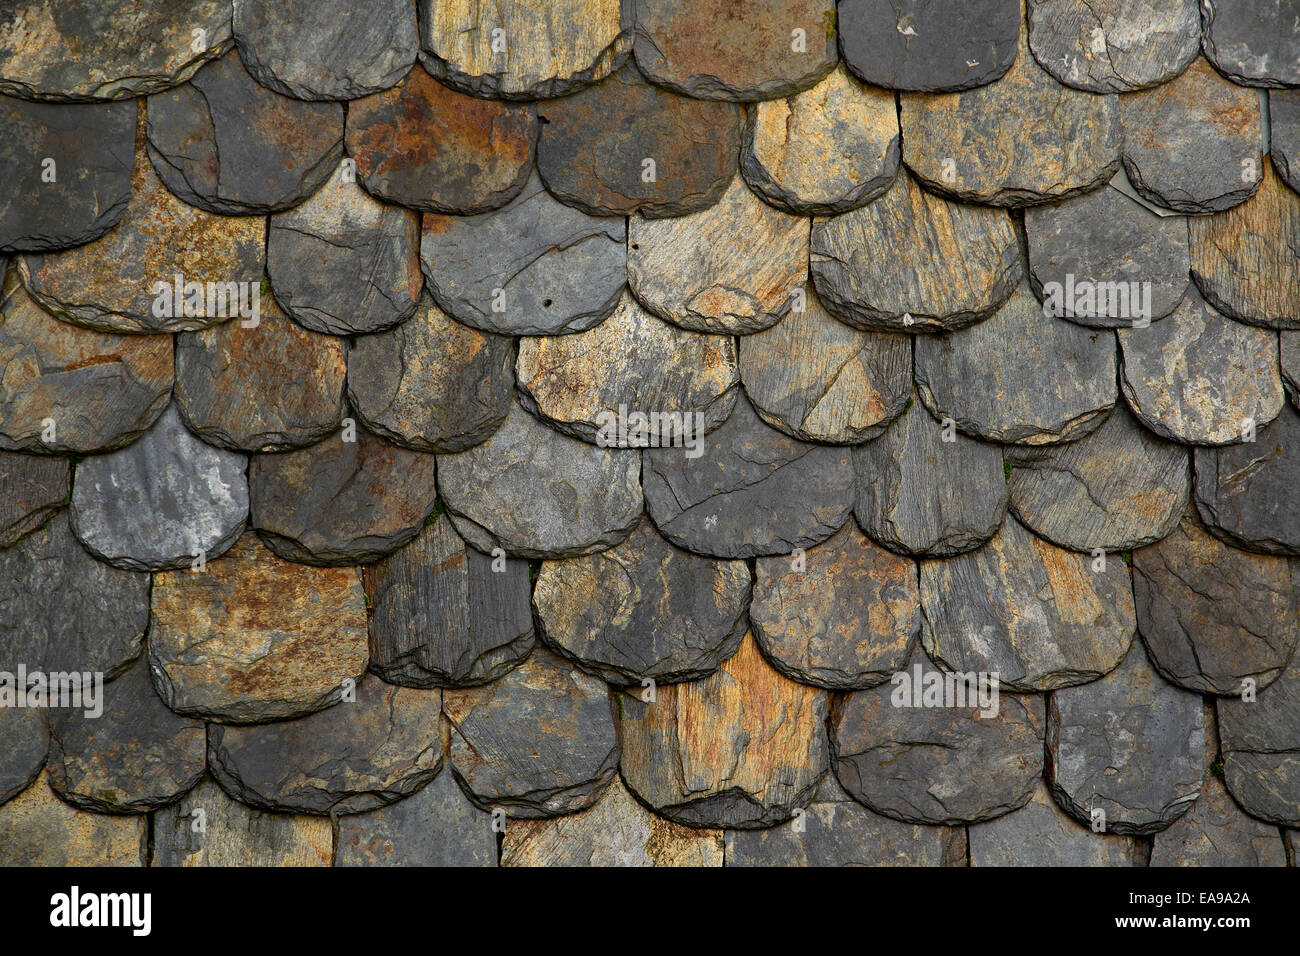 Old slate roof tiles with rounded edges in close-up Stock Photo